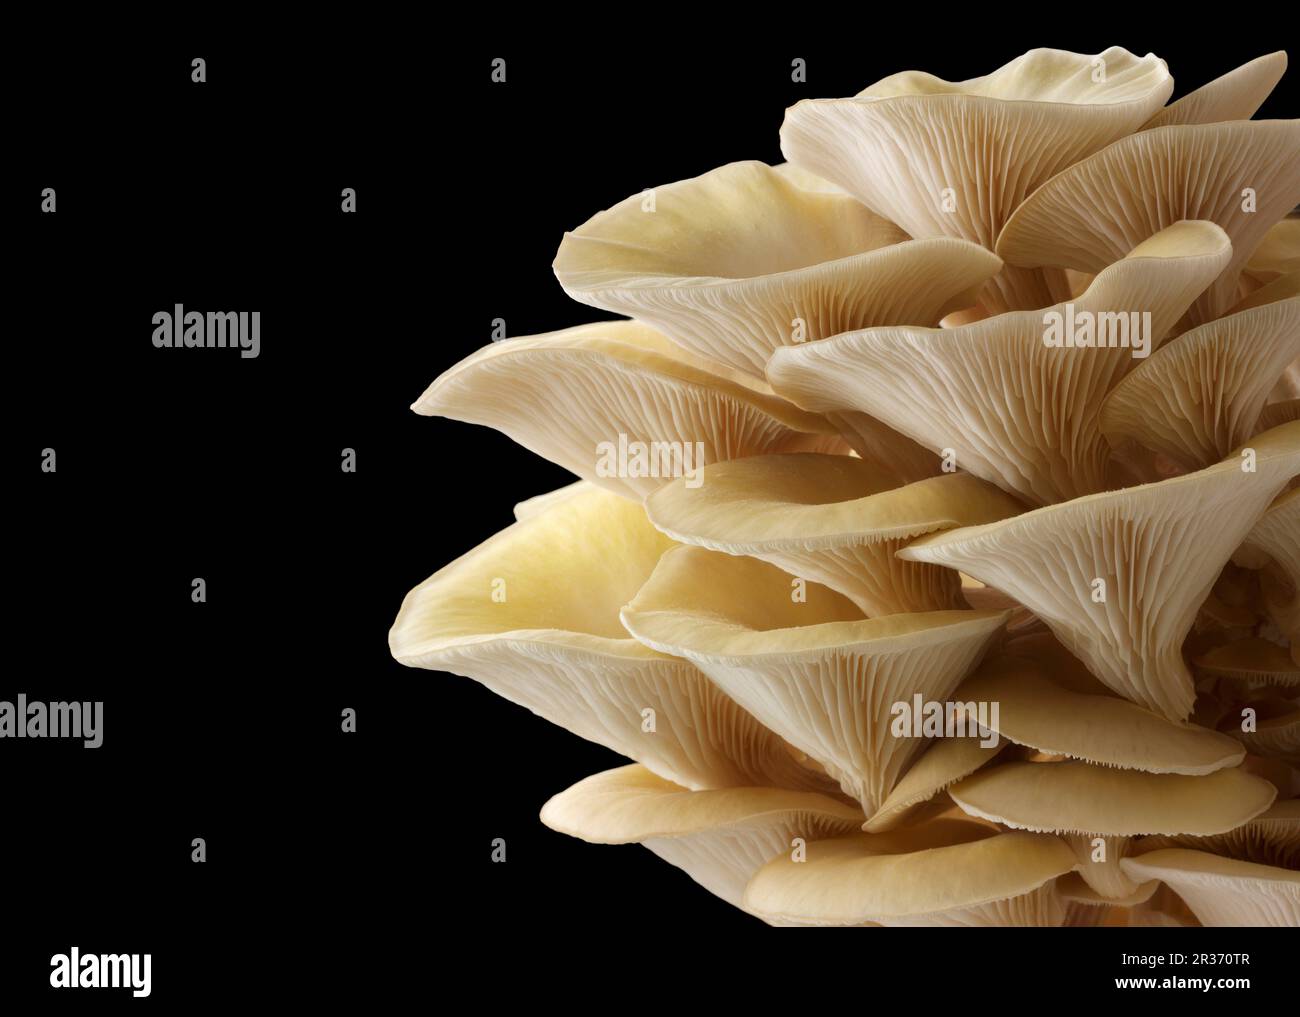 Fresh picked edible yellow or golden oyster mushrooms (Pleurotus citrinopileatus) in a grow box against a black background Stock Photo